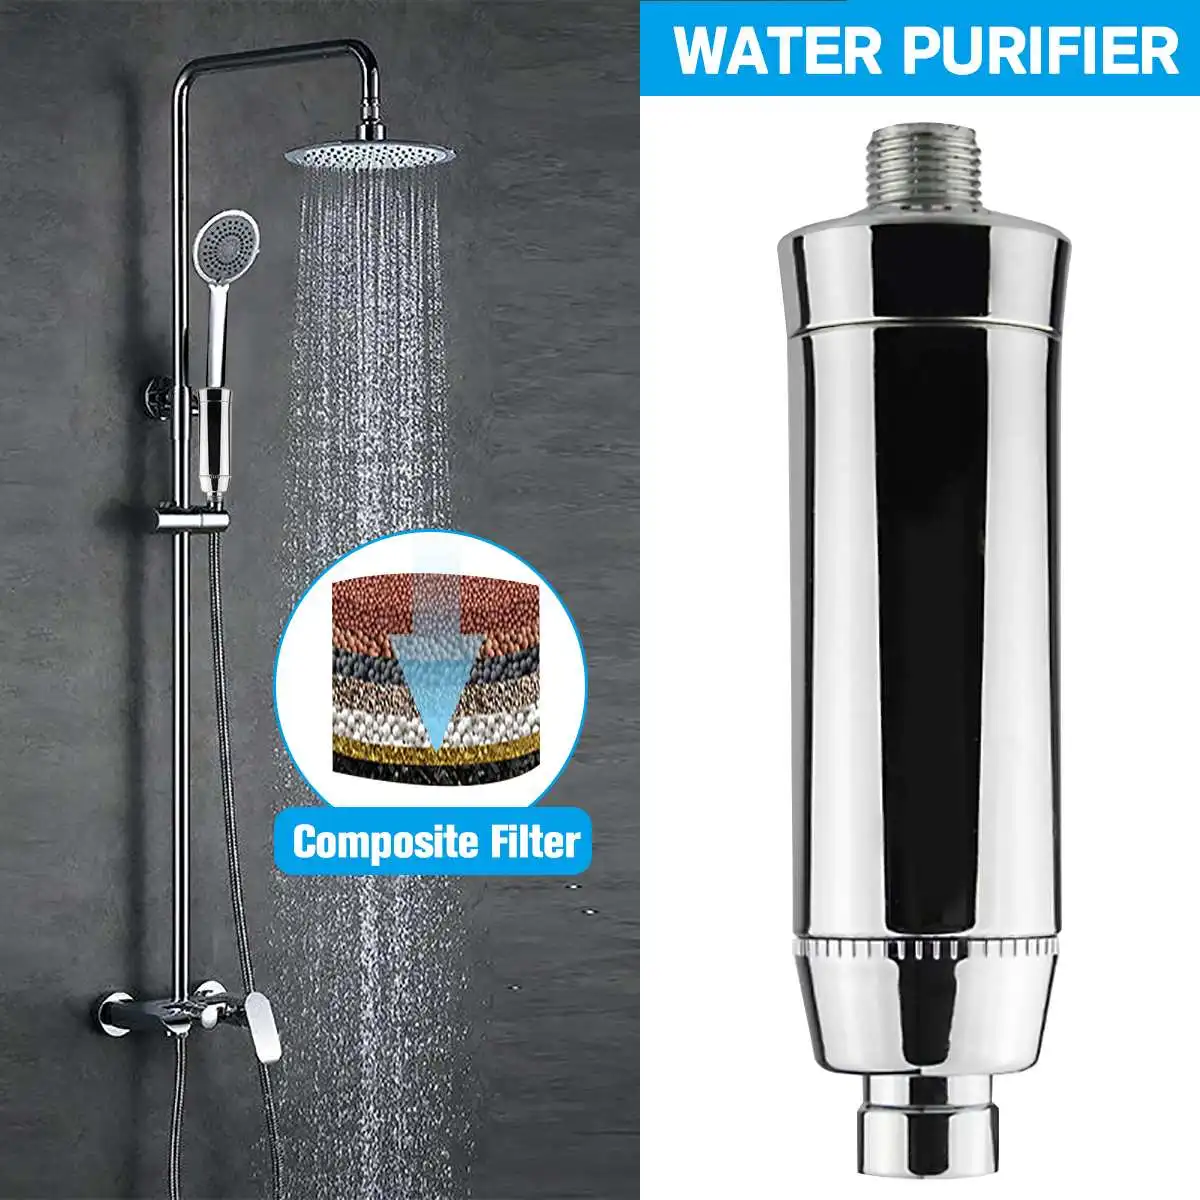 

Home Water Purifier Chlorine Shower Filter Activated Carbon Faucets Purification Eliminates Chlorine Hard Water Bathroom